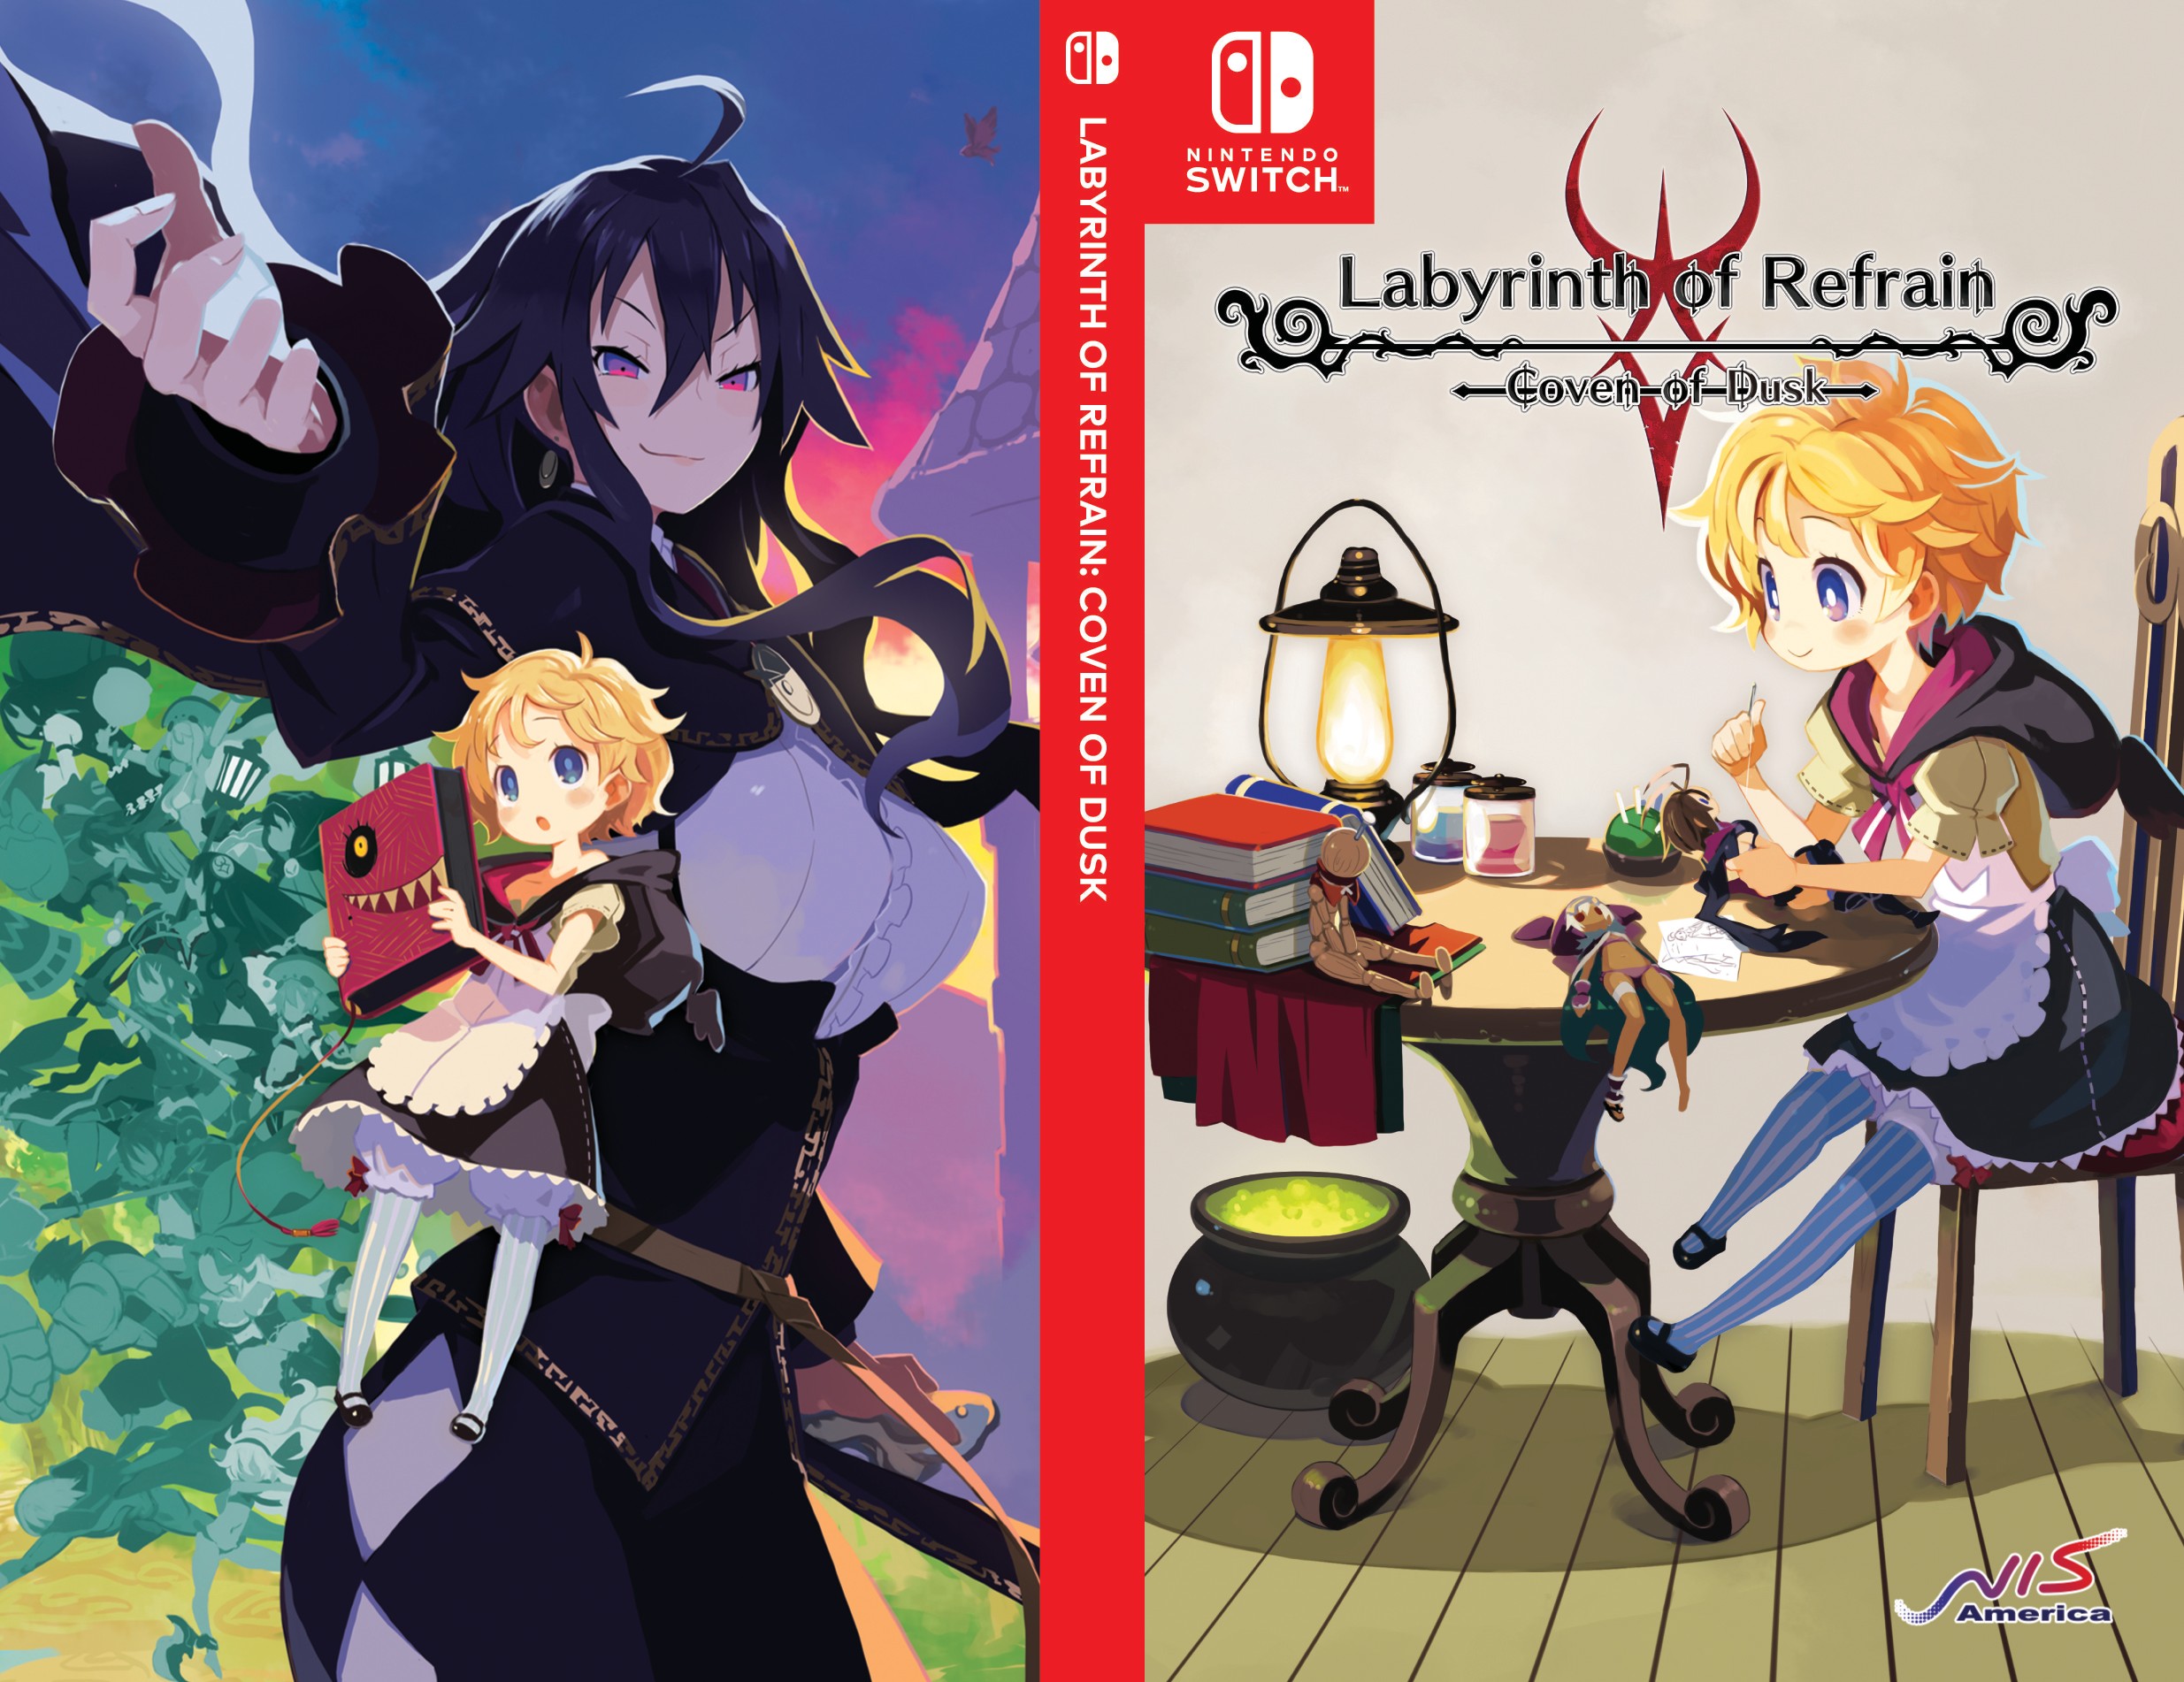 Labyrinth of Refrain: Coven of Dusk Images. 